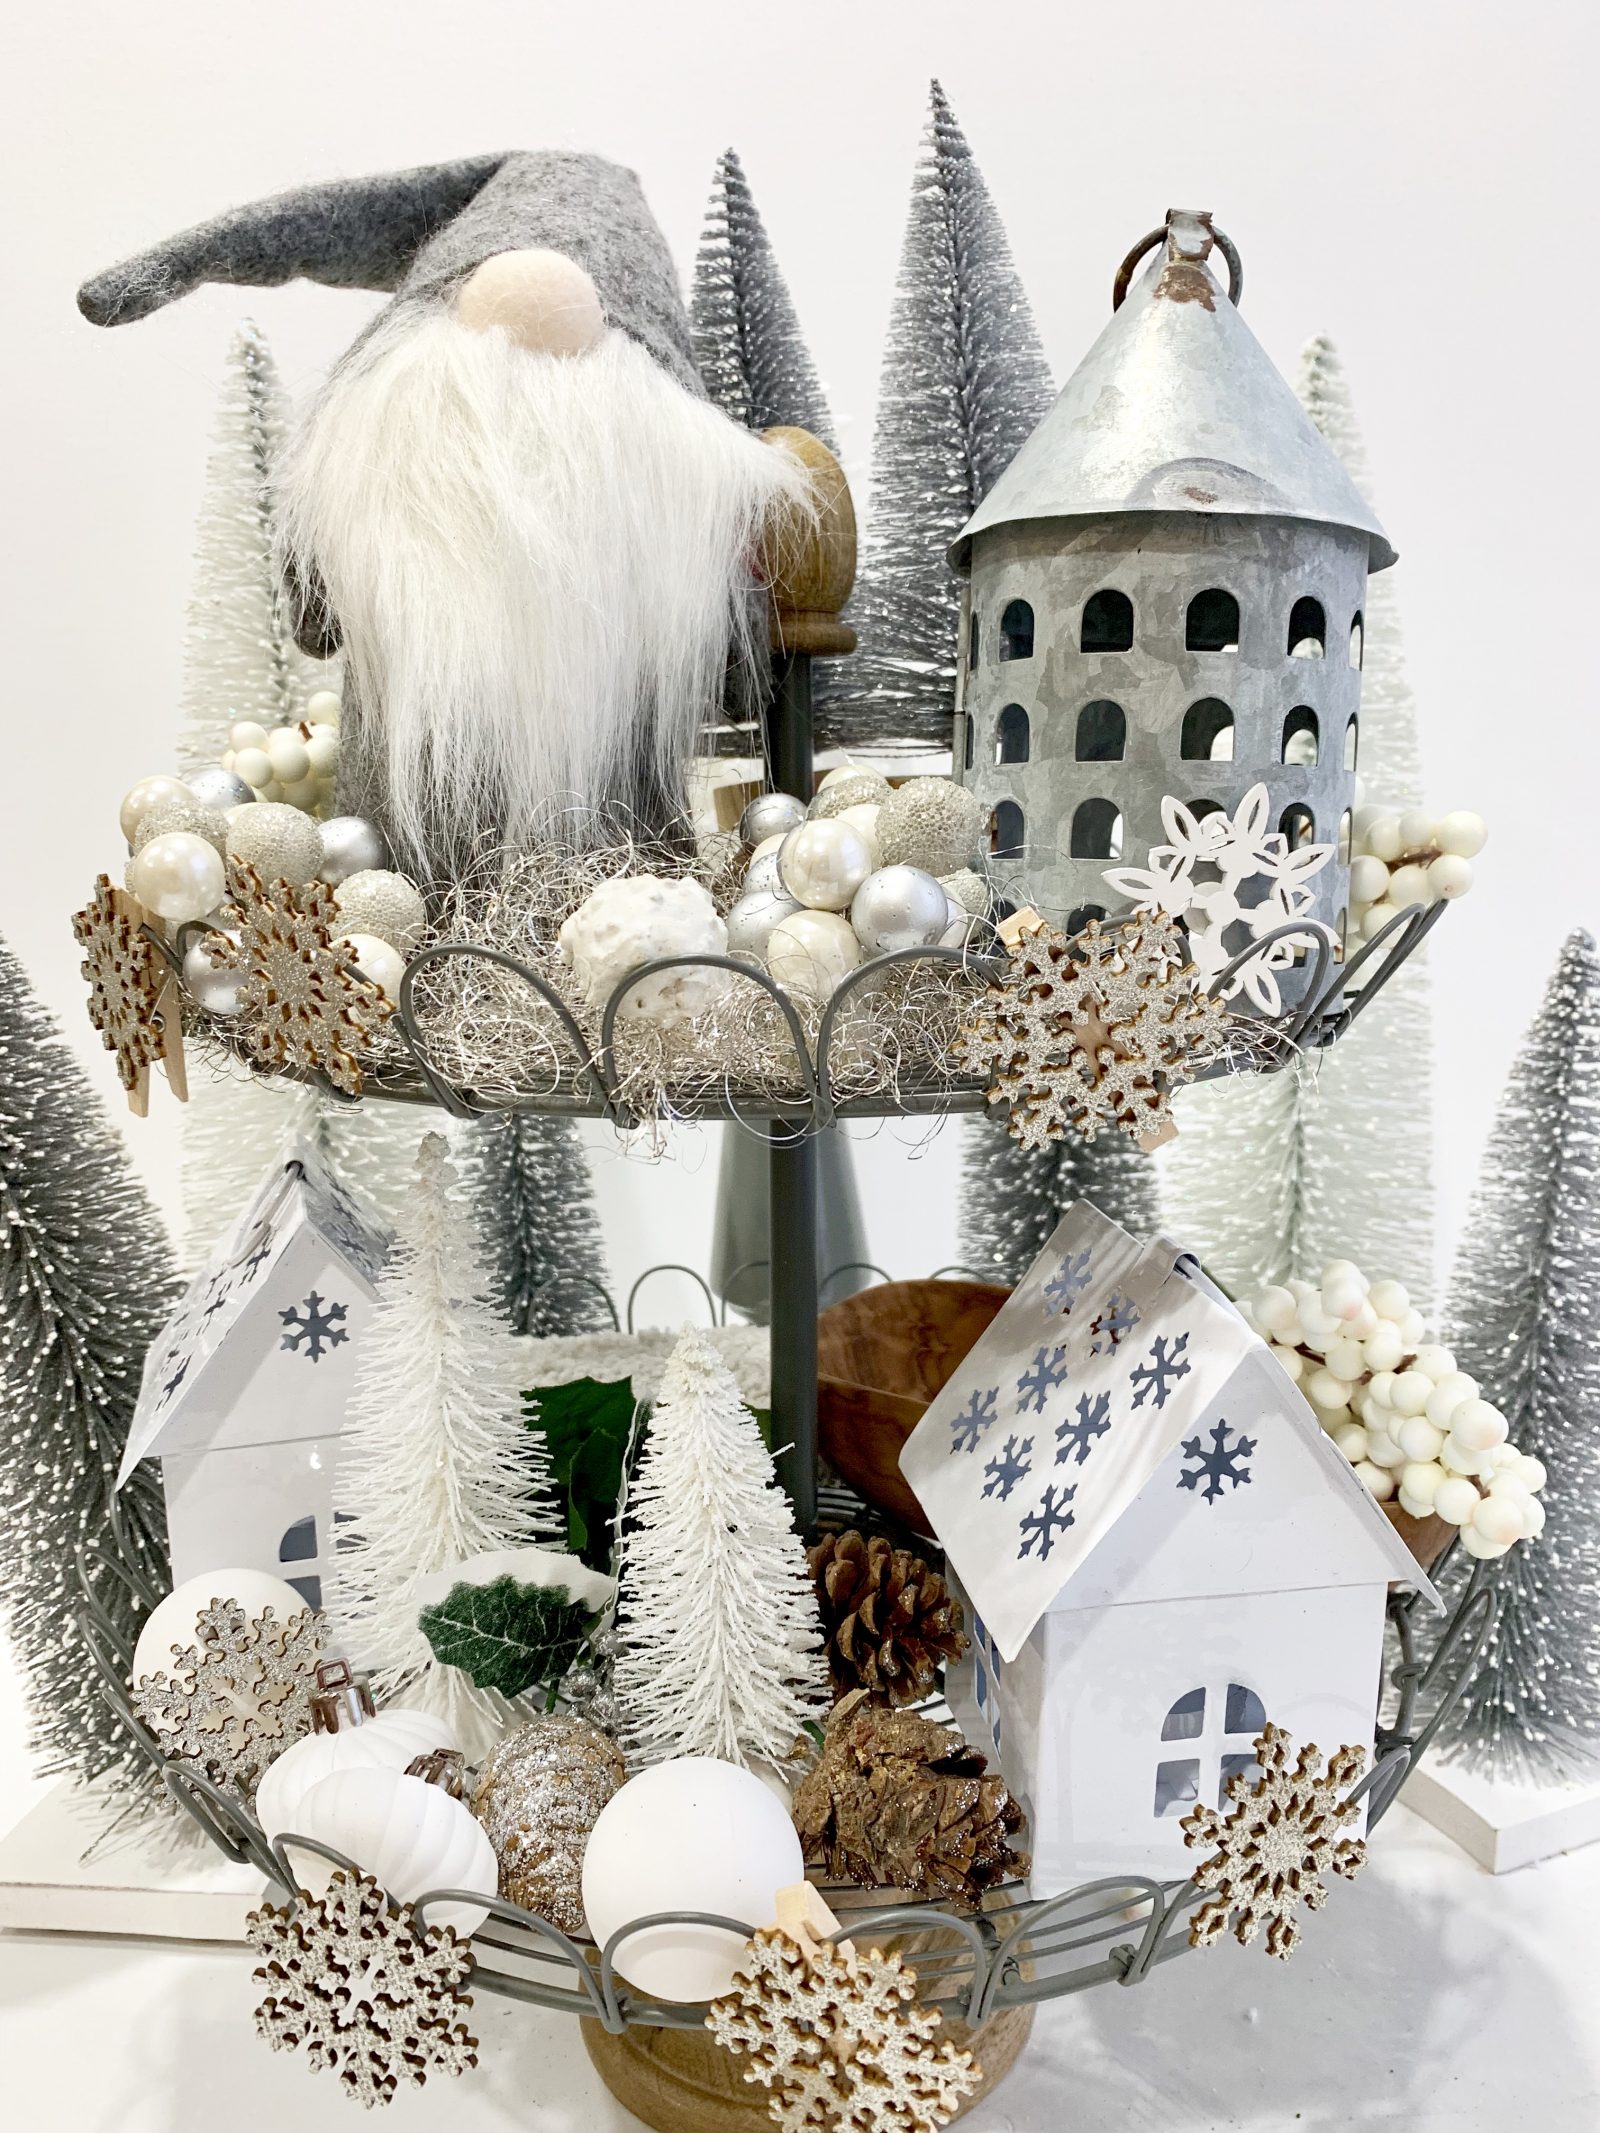 How to Style Your Tiered Stand for Christmas Tomte Watching Over the Family #Farmhouse #Affordable #BudgetFriendly #Christmas #DIY #ChristmasDecor #FarmhouseDecor